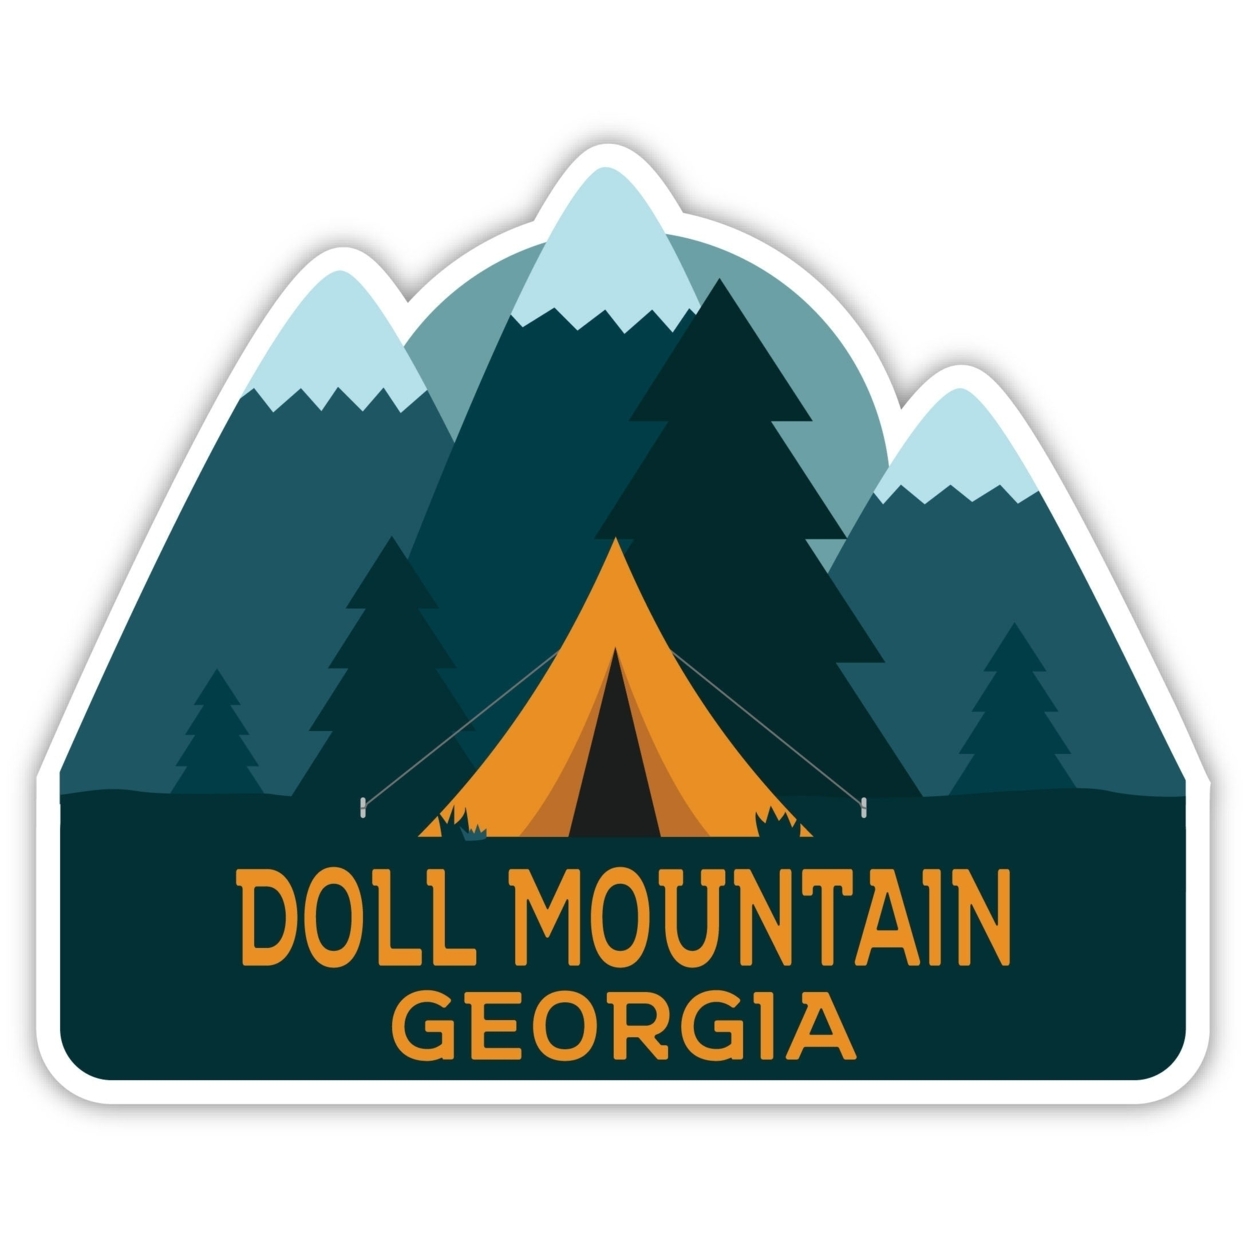 Doll Mountain Georgia Souvenir Decorative Stickers (Choose Theme And Size) - 4-Pack, 6-Inch, Tent